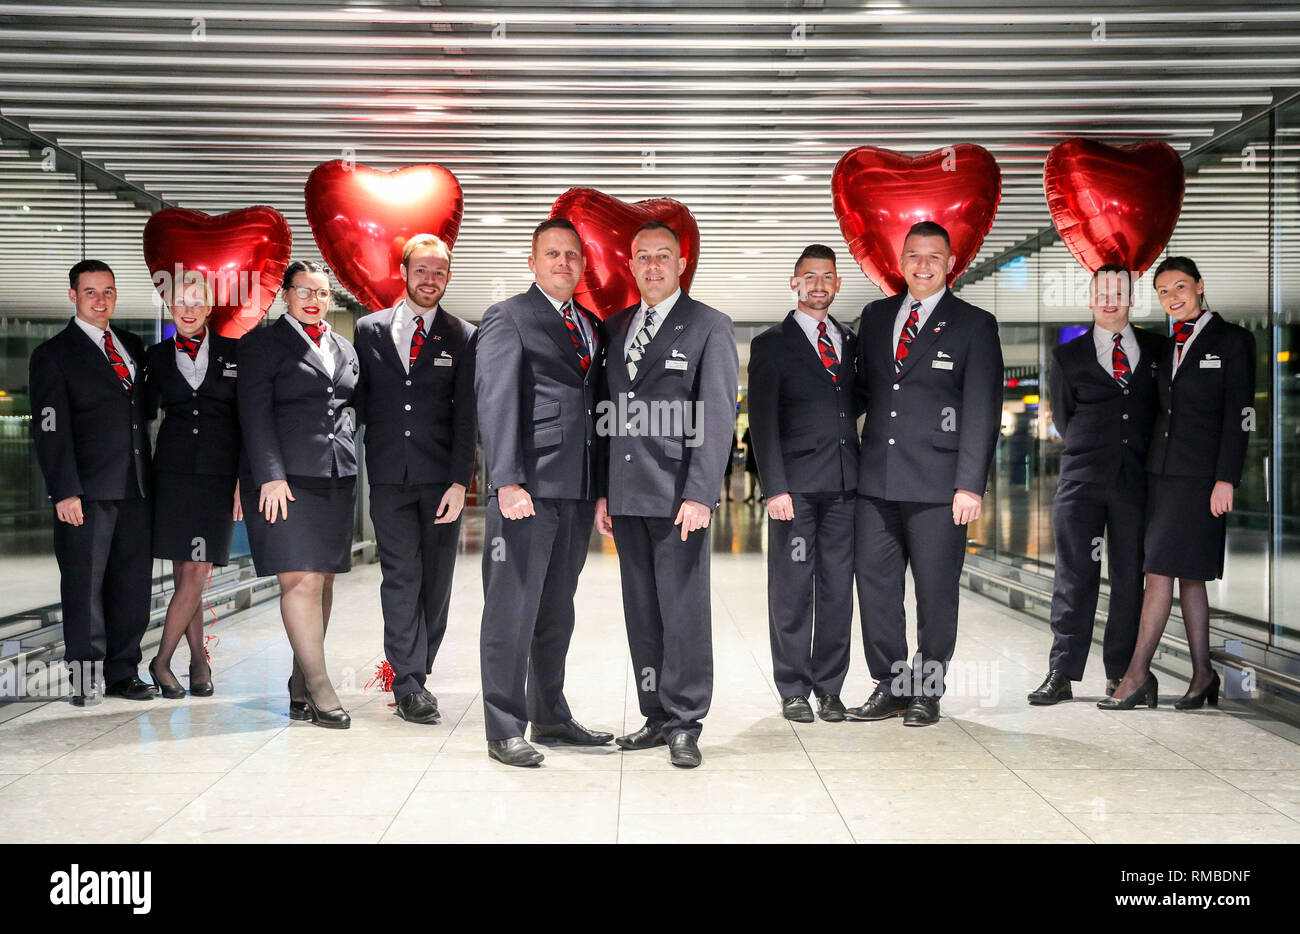 (Left to right) British Airways cabin crew Joshua Halsall, Natasha Holliday, Aimee Anders, Christopher Coyne, Nathan Weekes, Carl Bloor, George Glanvill, Samuel Shervill, David Fisher and Emma Humberstone, who are also couples, pose for a photograph at Heathrow's Terminal 5 prior to departing on their flight BA245 to Buenos Aires, where they will spend Valentines day enjoying a romantic getaway in the Argentinian capital. Stock Photo